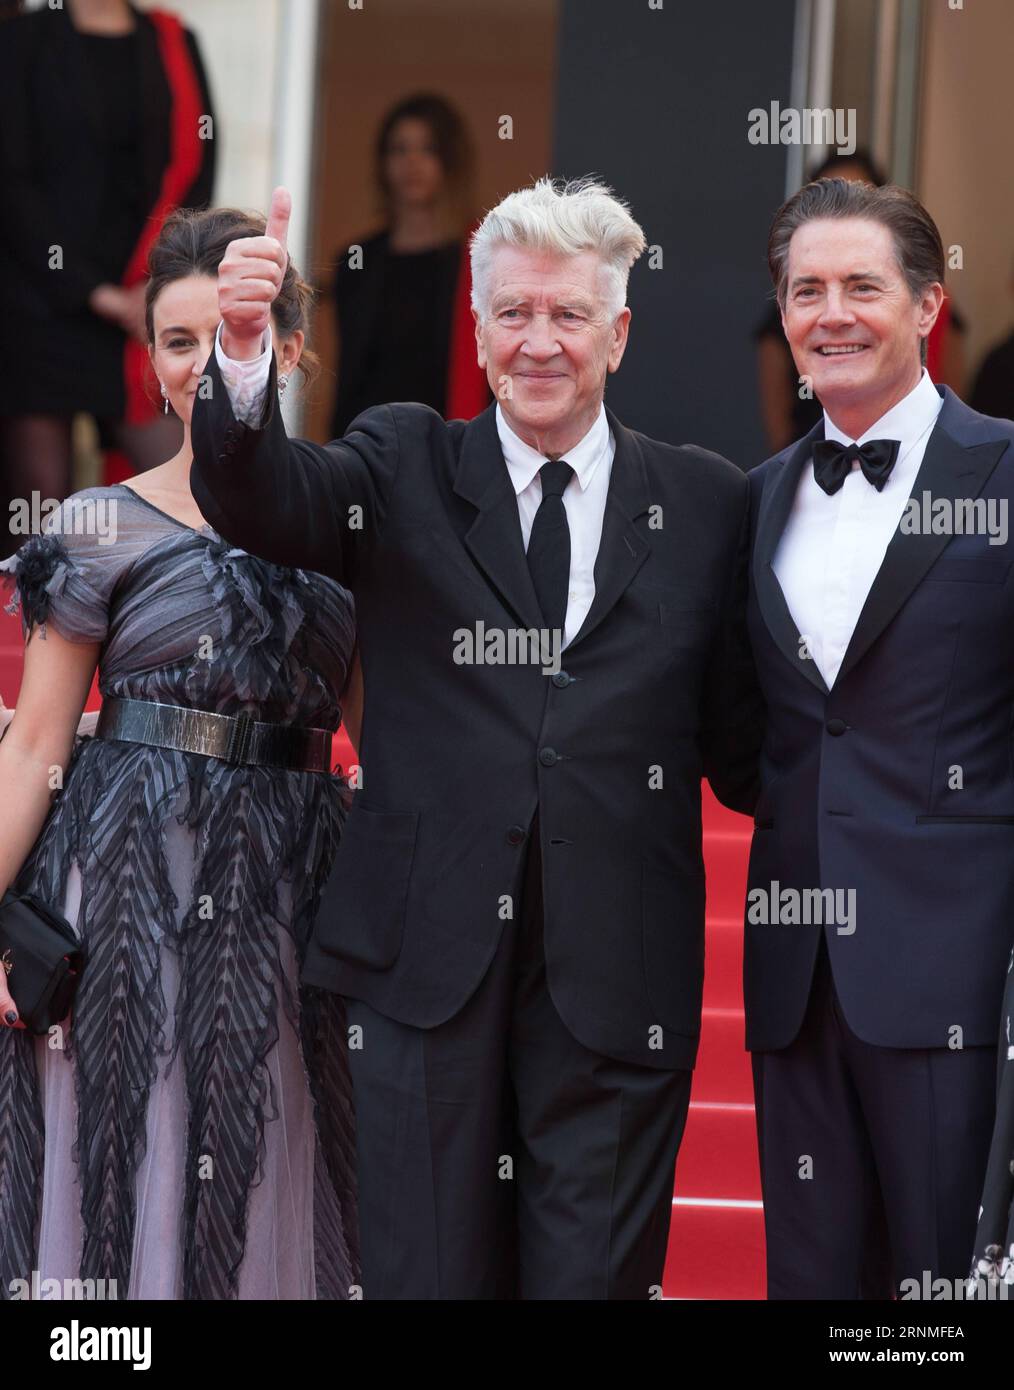 (170526) -- CANNES, May 26, 2017 -- US director David Lynch (C), his wife Emily Stofle (L) and US actor Kyle MacLachlan pose on the red carpet for the screening of the new episodes of Twin Peak during the 70th annual Cannes Film Festival at Palais des Festivals in Cannes, France, on May 25, 2017. ) (yy) FRANCE-CANNES-DAVID LYNCH-TWIN PEAK-SCREENING xuxjinquan PUBLICATIONxNOTxINxCHN   Cannes May 26 2017 U.S. Director David Lynch C His wife Emily Stofle l and U.S. Actor Kyle MacLachlan Pose ON The Red Carpet for The Screening of The New Episodes of Twin Peak during The 70th Annual Cannes Film Fe Stock Photo